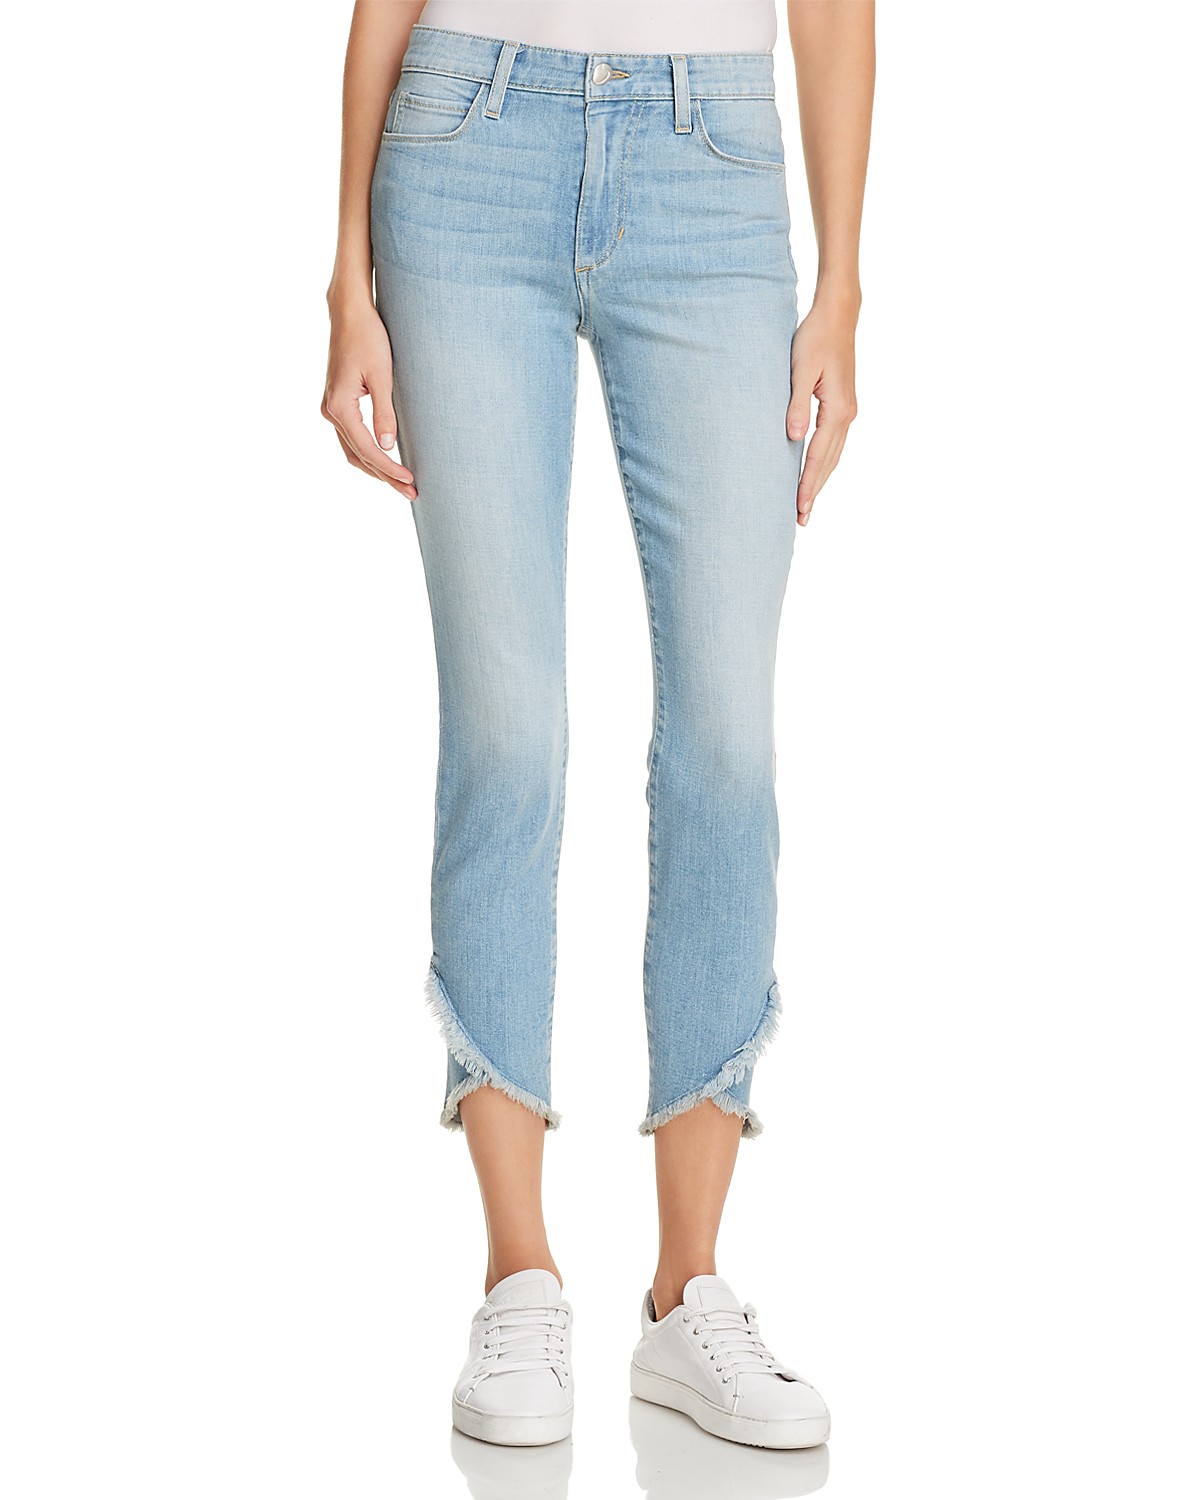 Bloomingdale’s Jeans from $99 Sale $99.00 - BuyVia